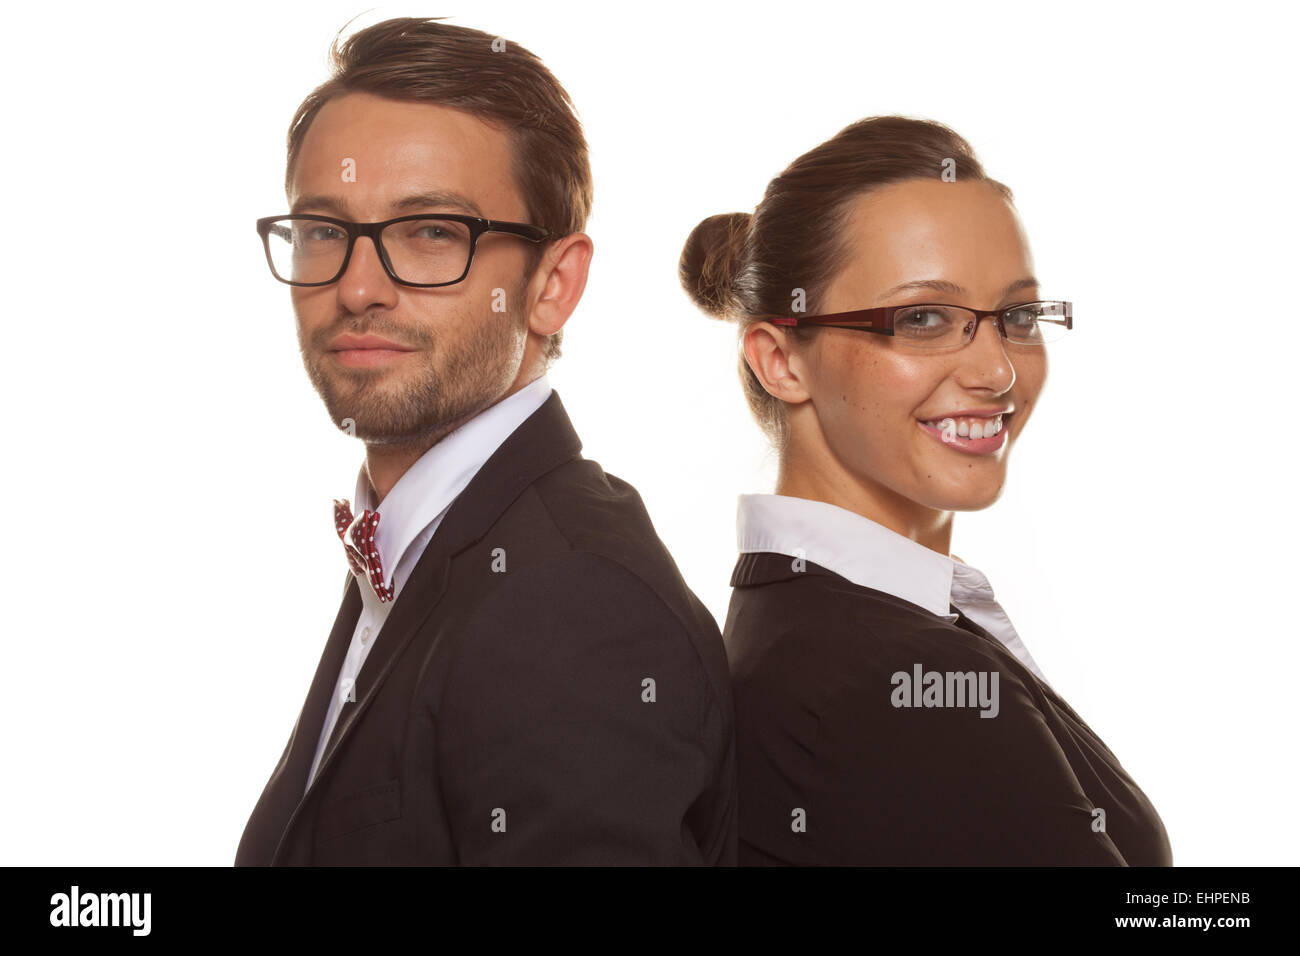 Business couple wearing glasses Banque D'Images